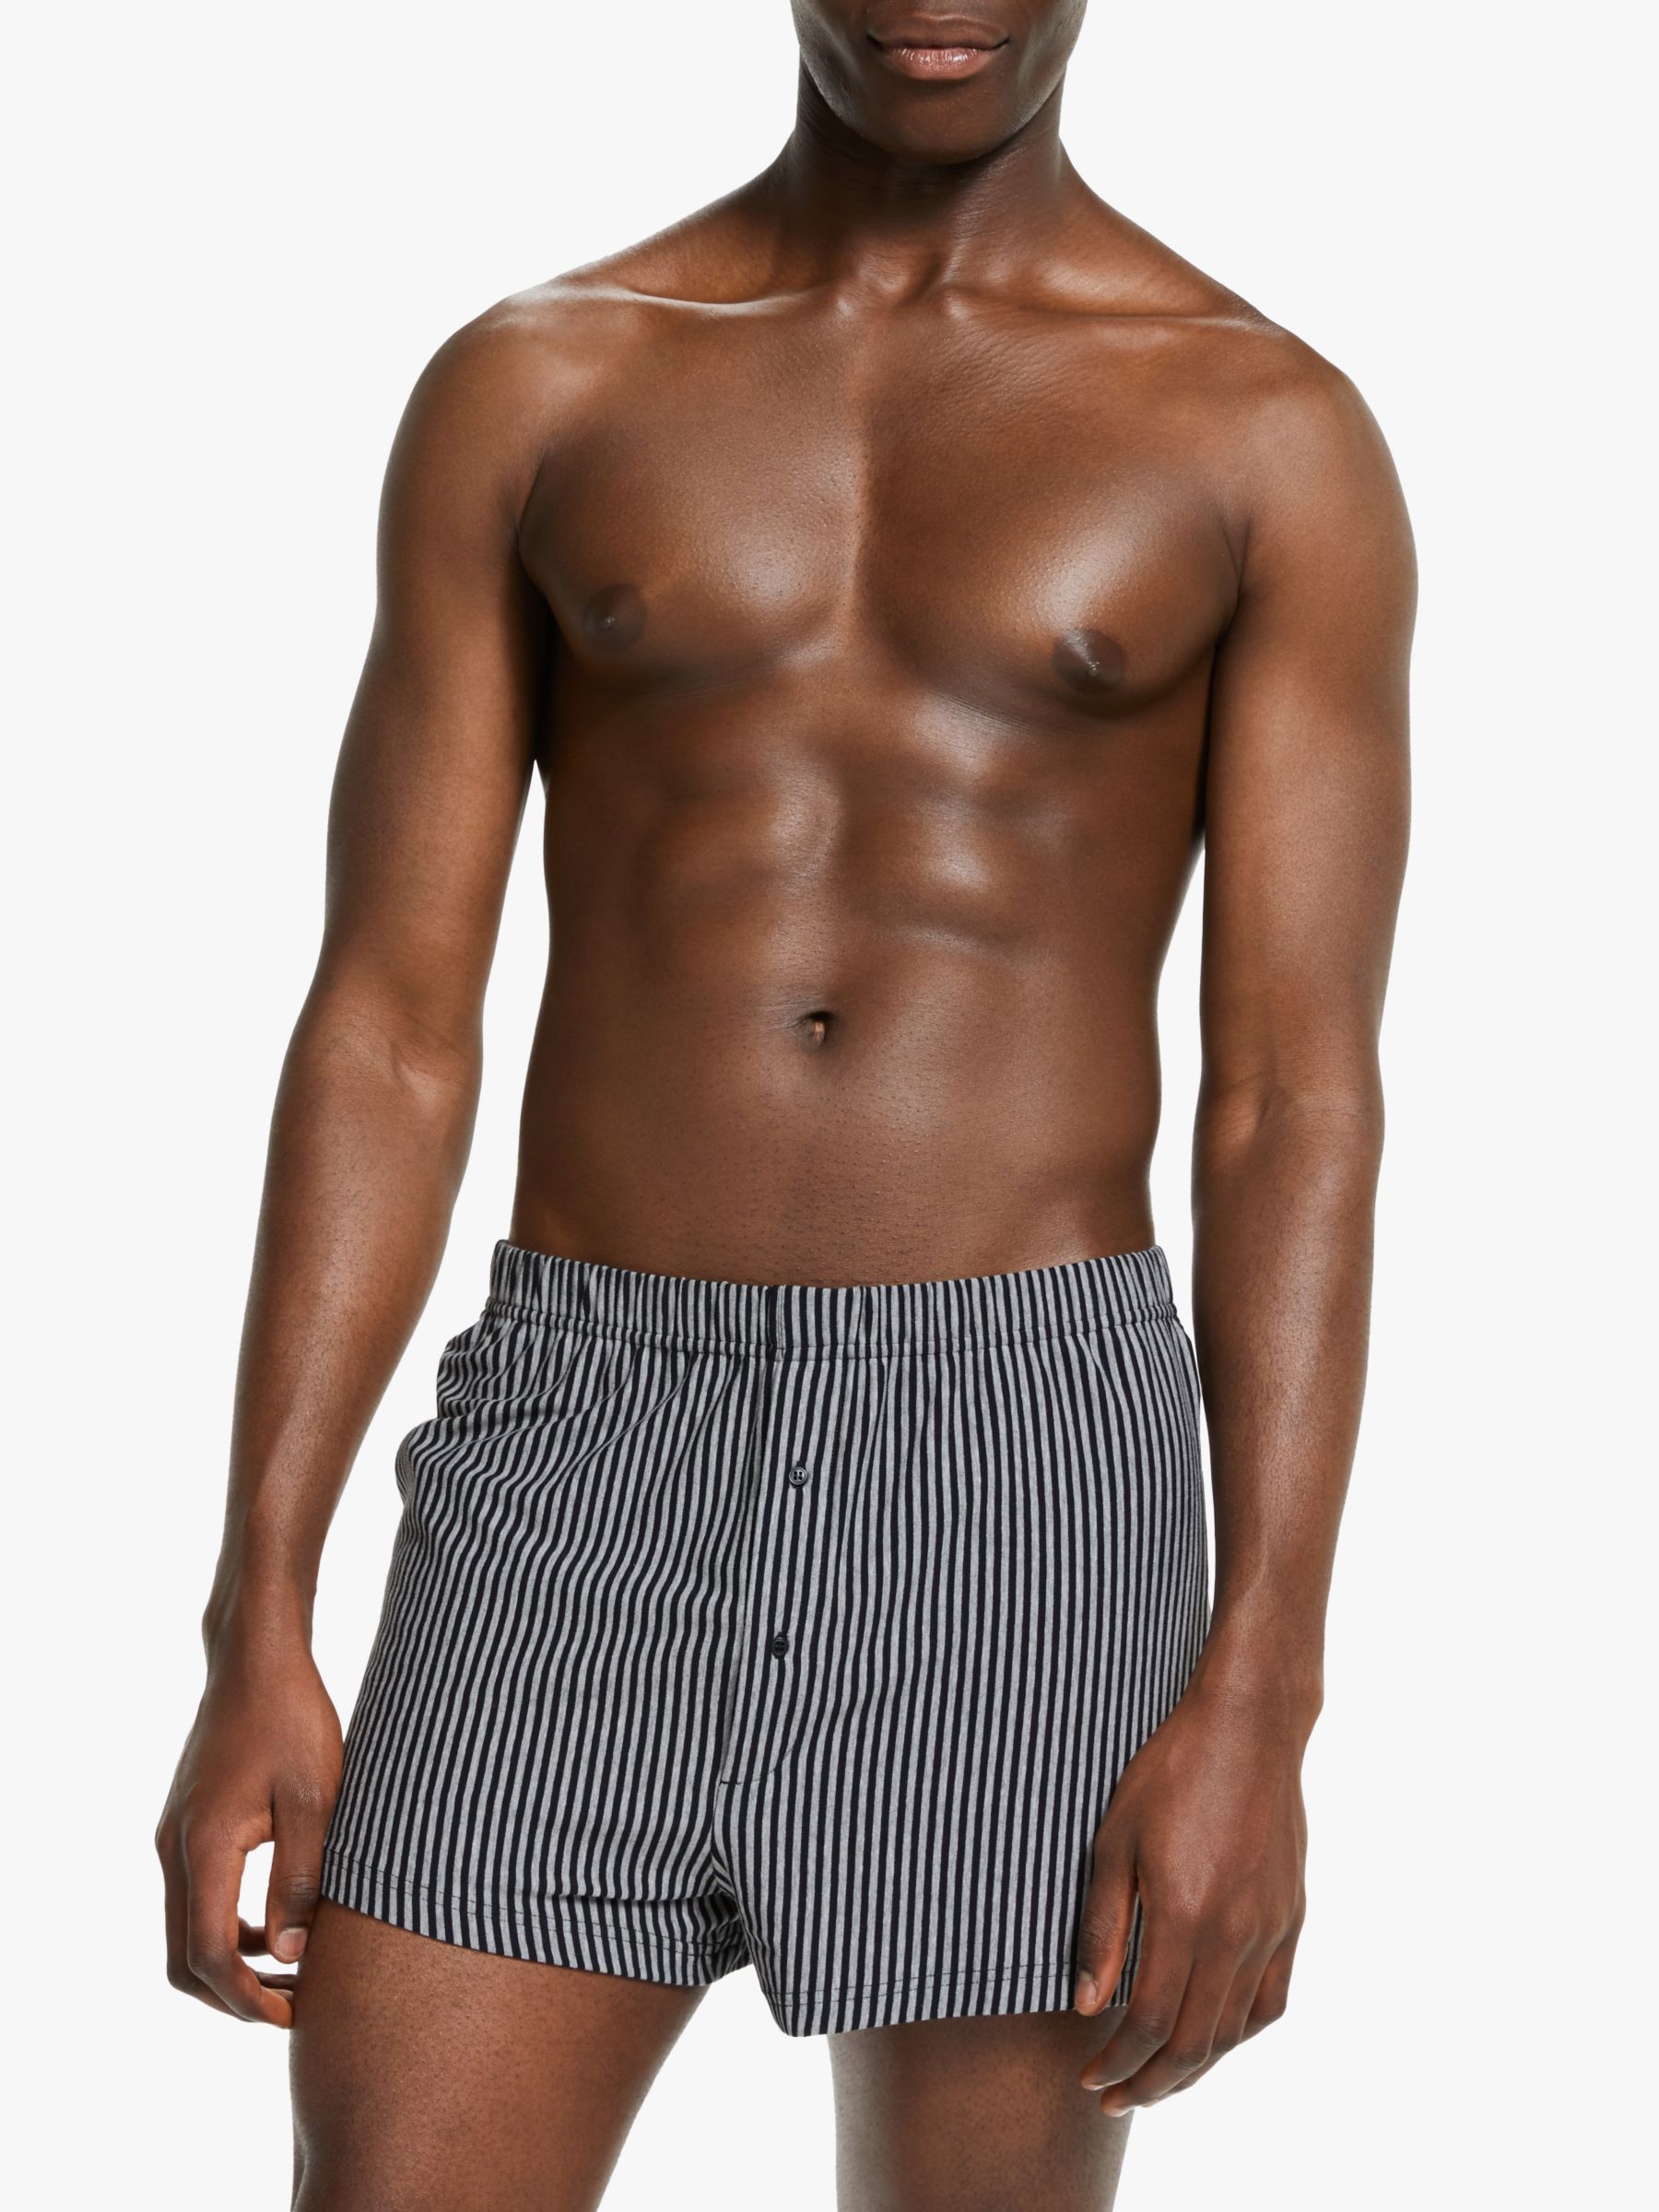 Shop John Lewis Mens Boxers up to 50% Off